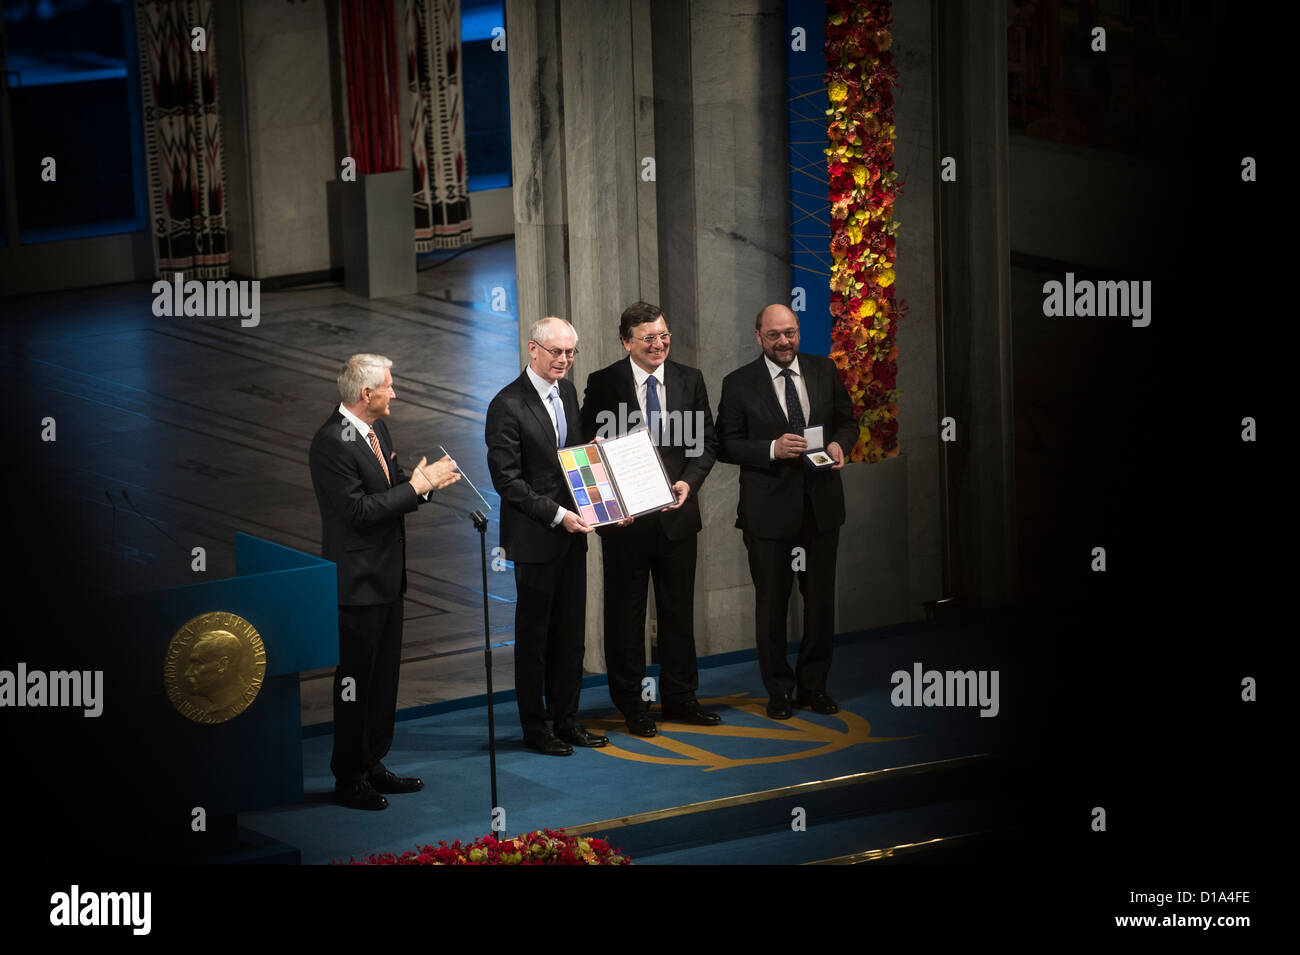 11/12/2012. Oslo, Norway. Nobel Peace Prize winners along with Thorbjoern Jagland at Nobel Peace Prize ceremony in Oslo. Stock Photo